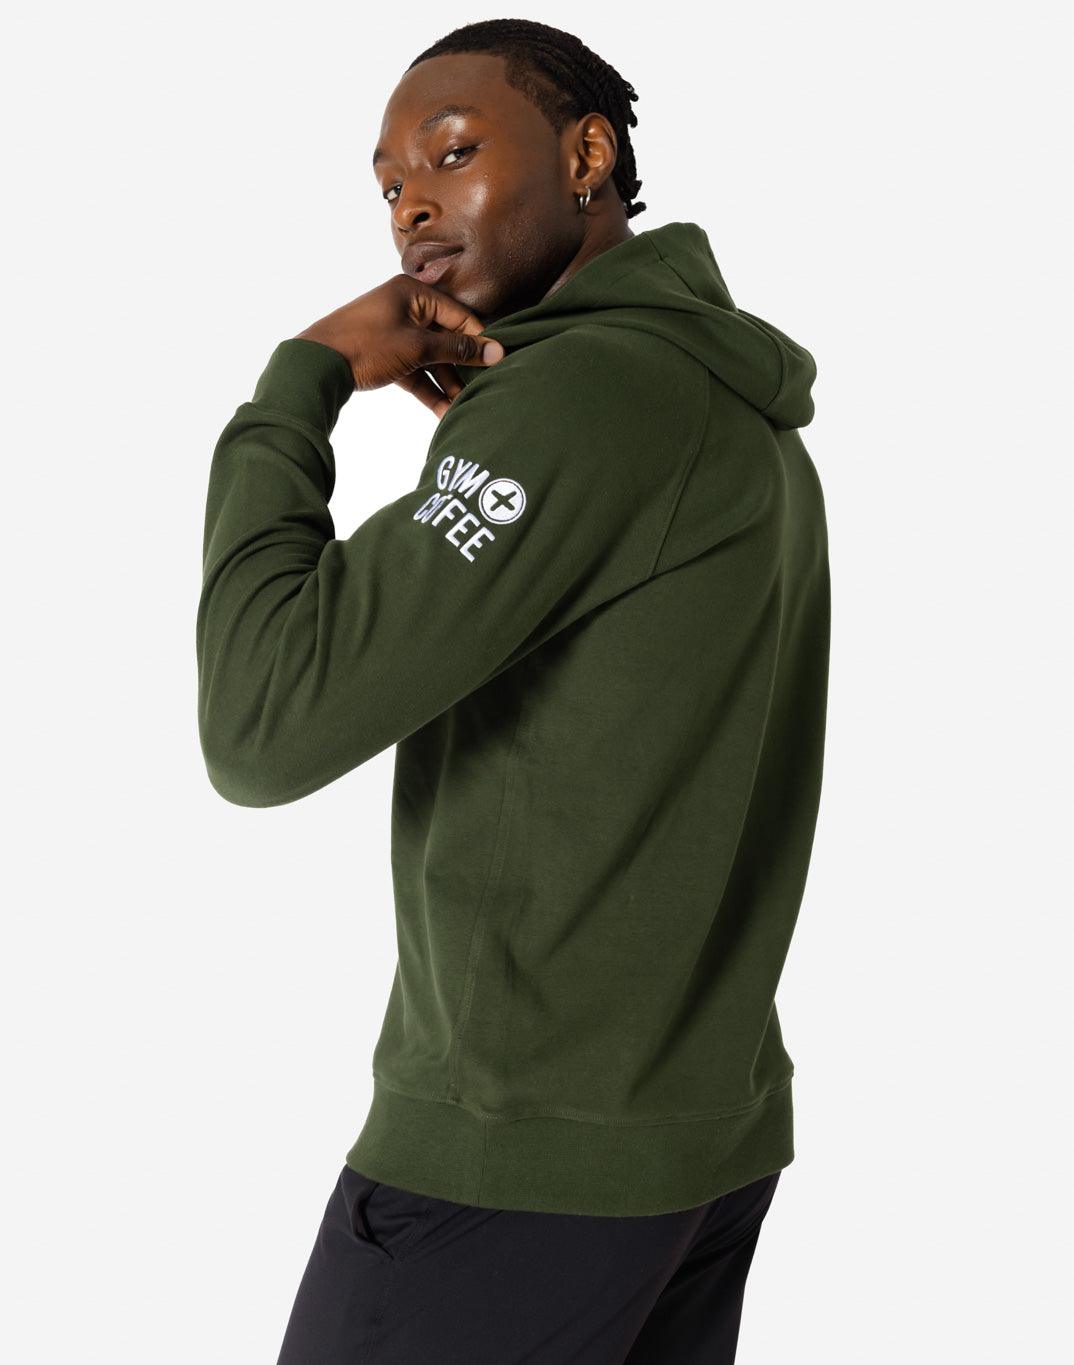 Chill Base Hoodie in Forest Green - Hoodies - Gym+Coffee IE